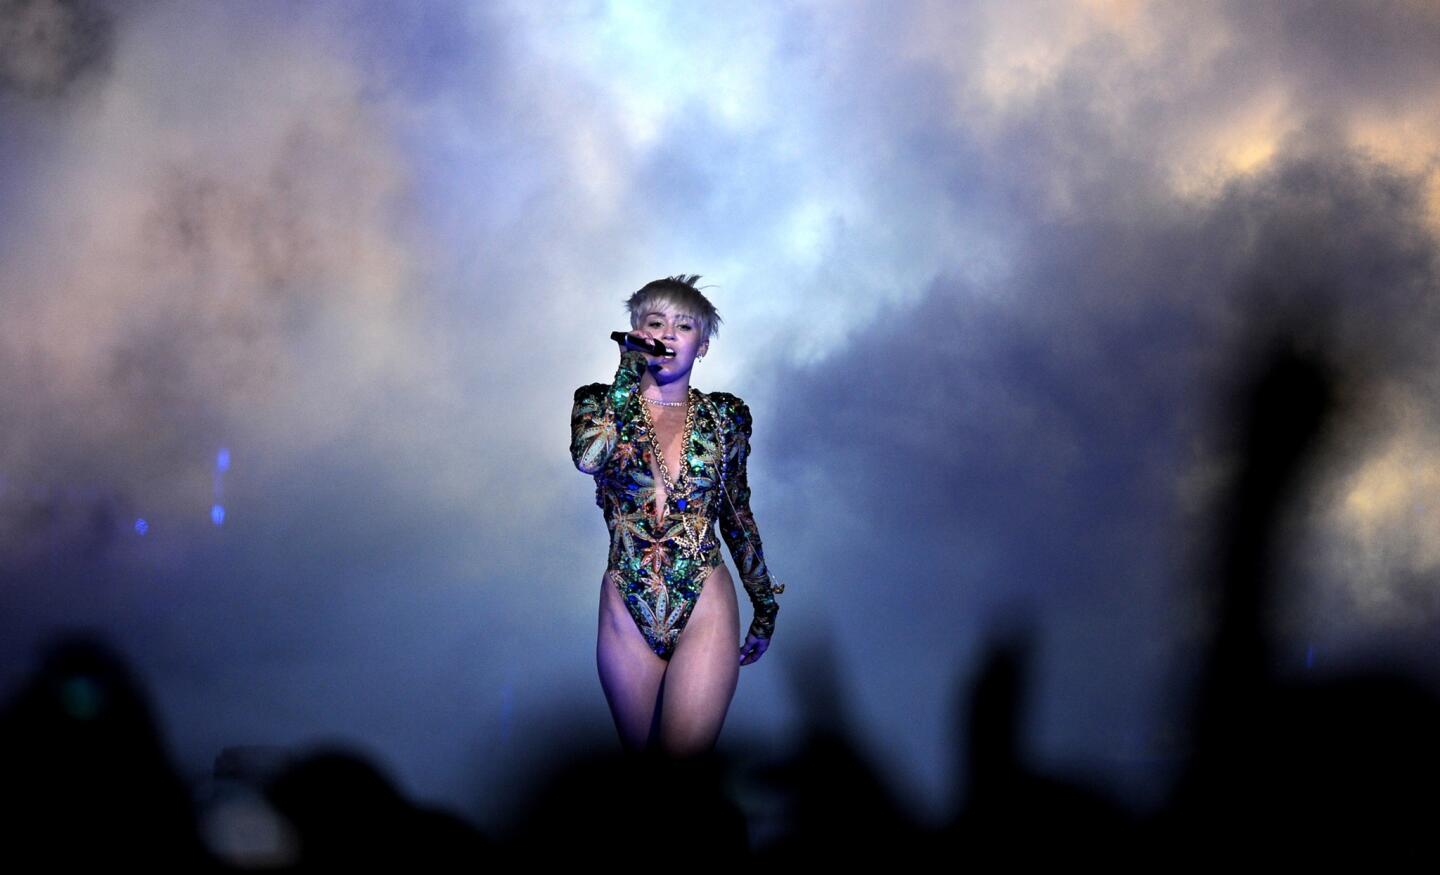 Miley Cyrus emerges from a cloud of smoke wearing a shiny green one-piece reminiscent of the 1990s.